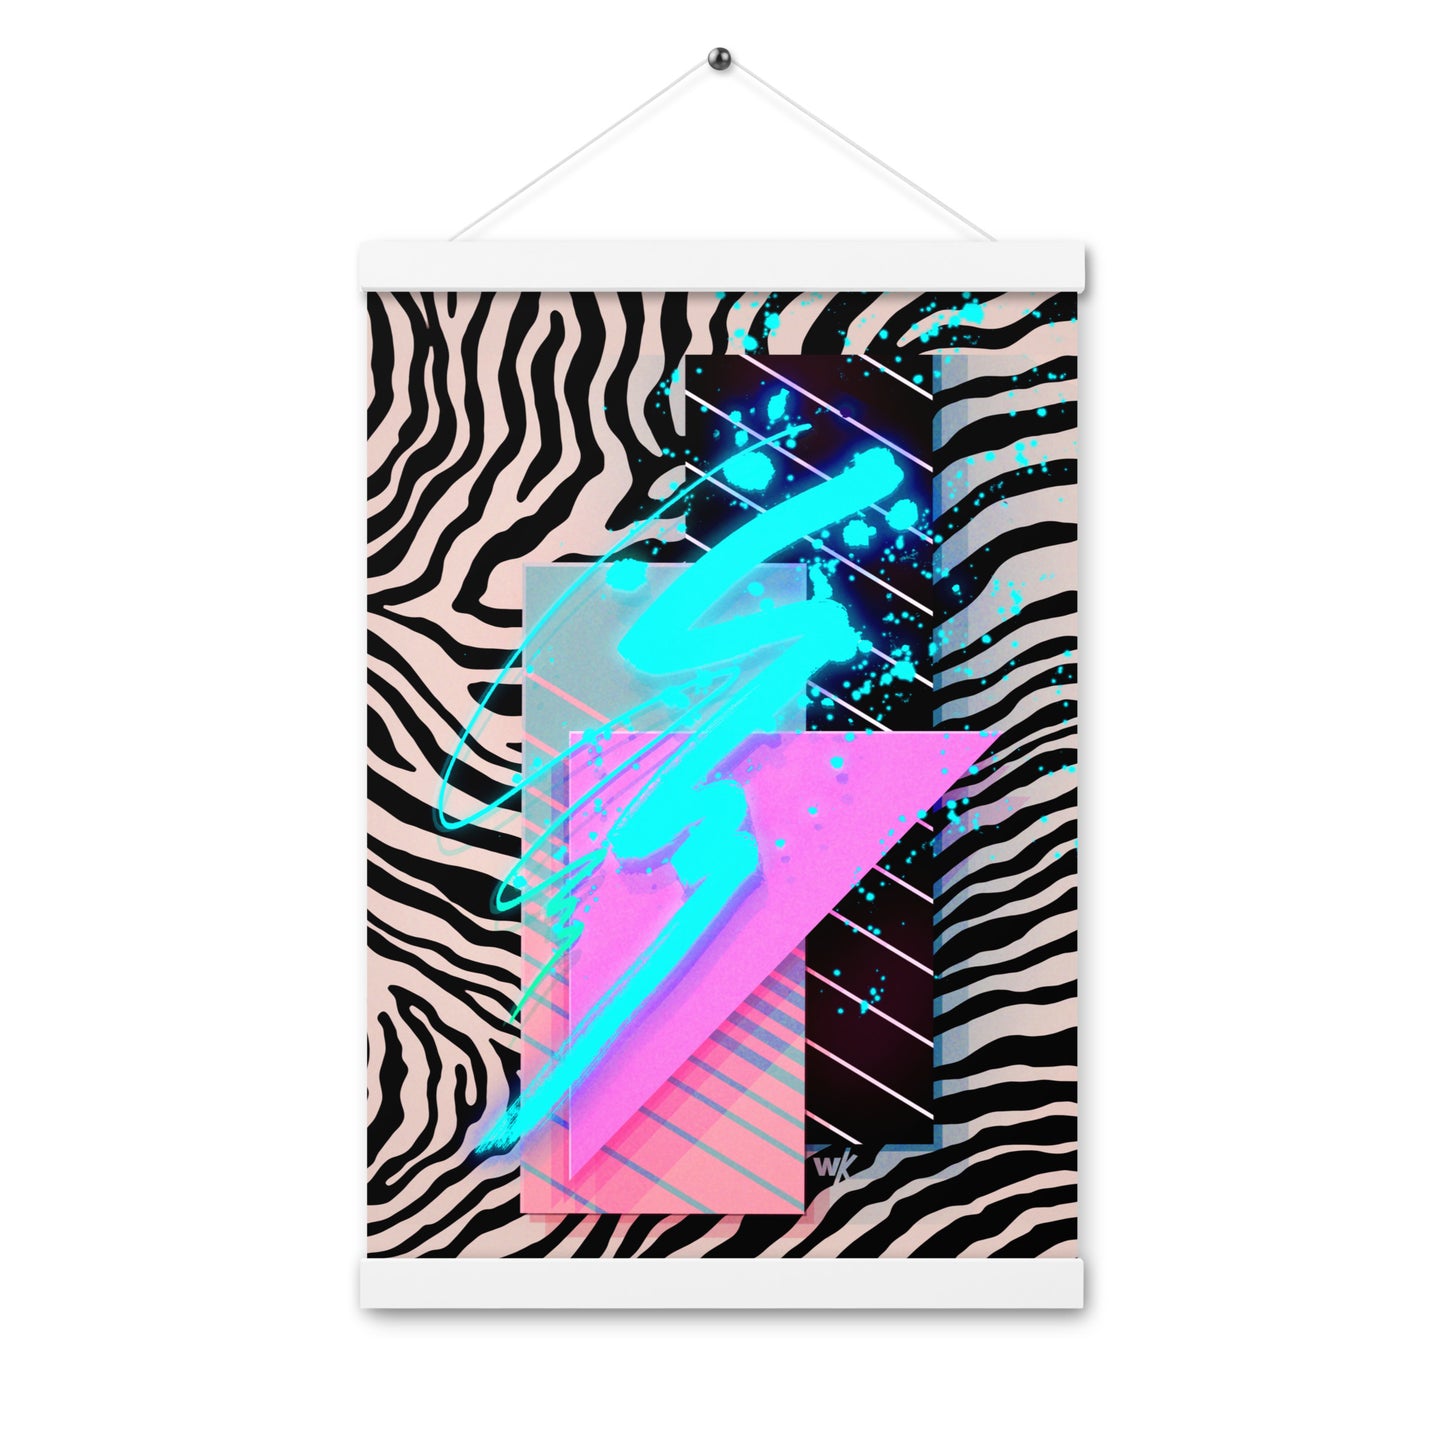 Stardust 1982 Hanging Poster 12"x18"